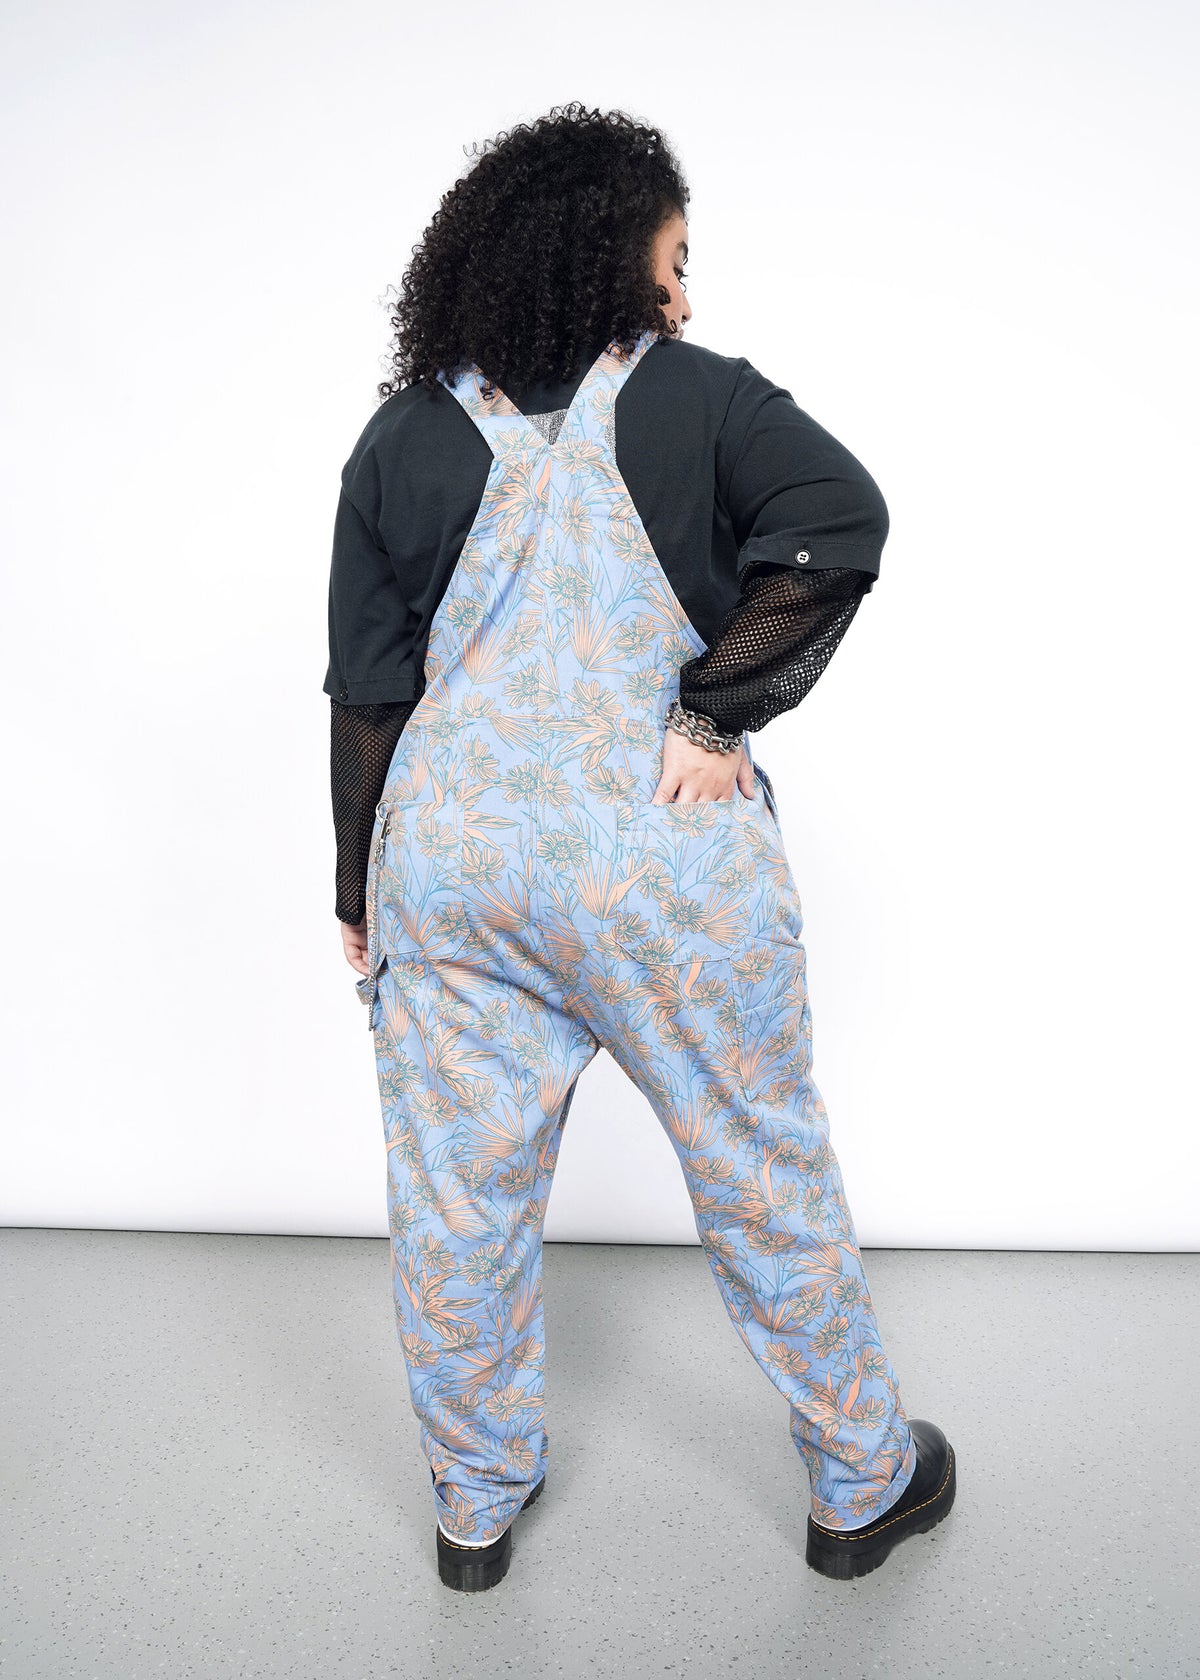 Back image of Model wearing the Essential Overall in Flower Press Periwinkle in size 1X, wearing black mesh long sleeve shirt and black platform shoes.